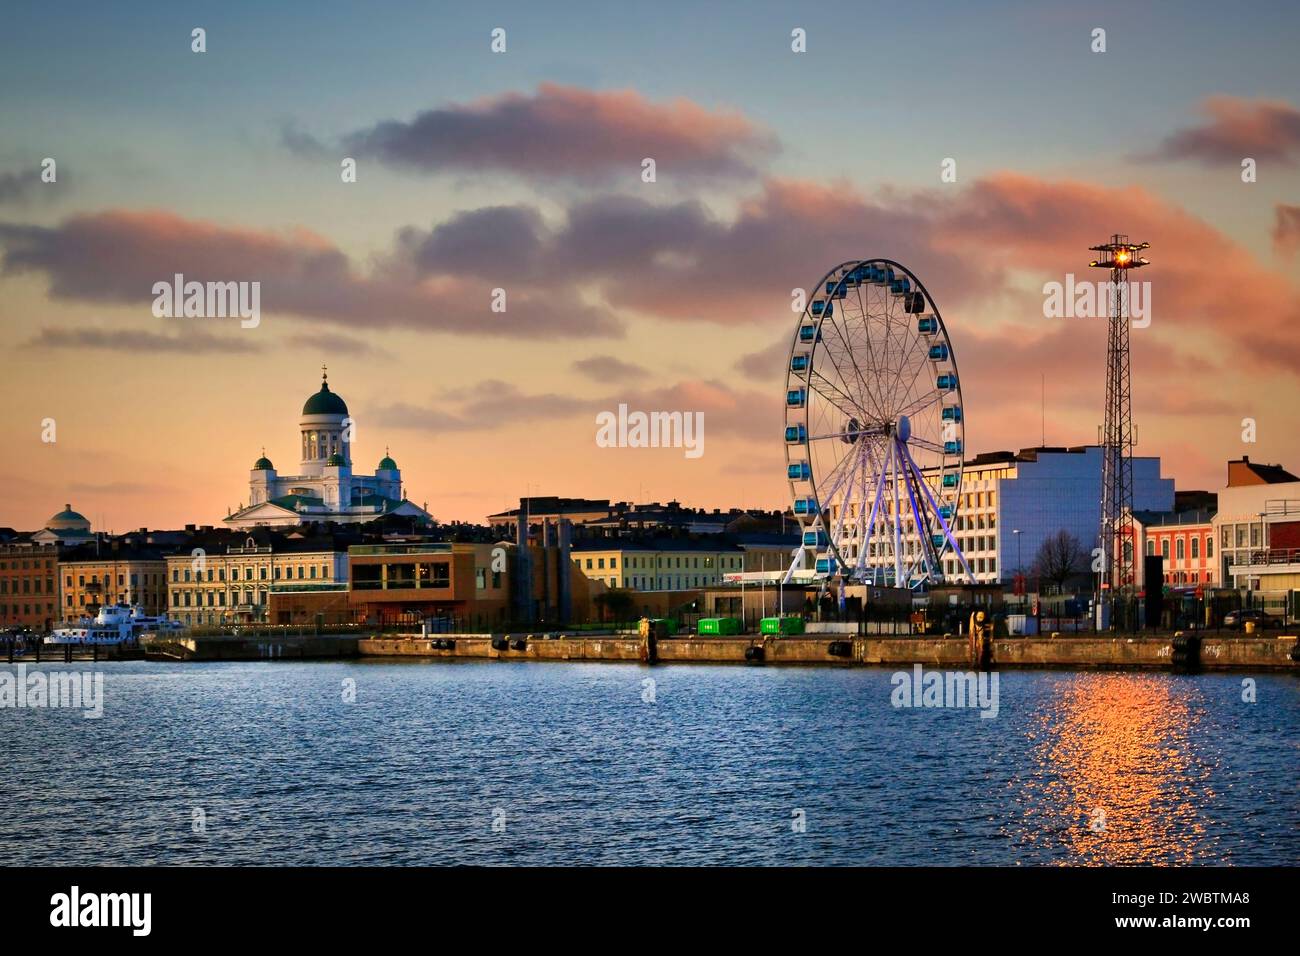 Helsinki cityline and South Harbour seen from ferry at sunset time. Kauppatori and Helsinki Cathedral (Left) and SkyWheel (Right). October 30, 2019. Stock Photo